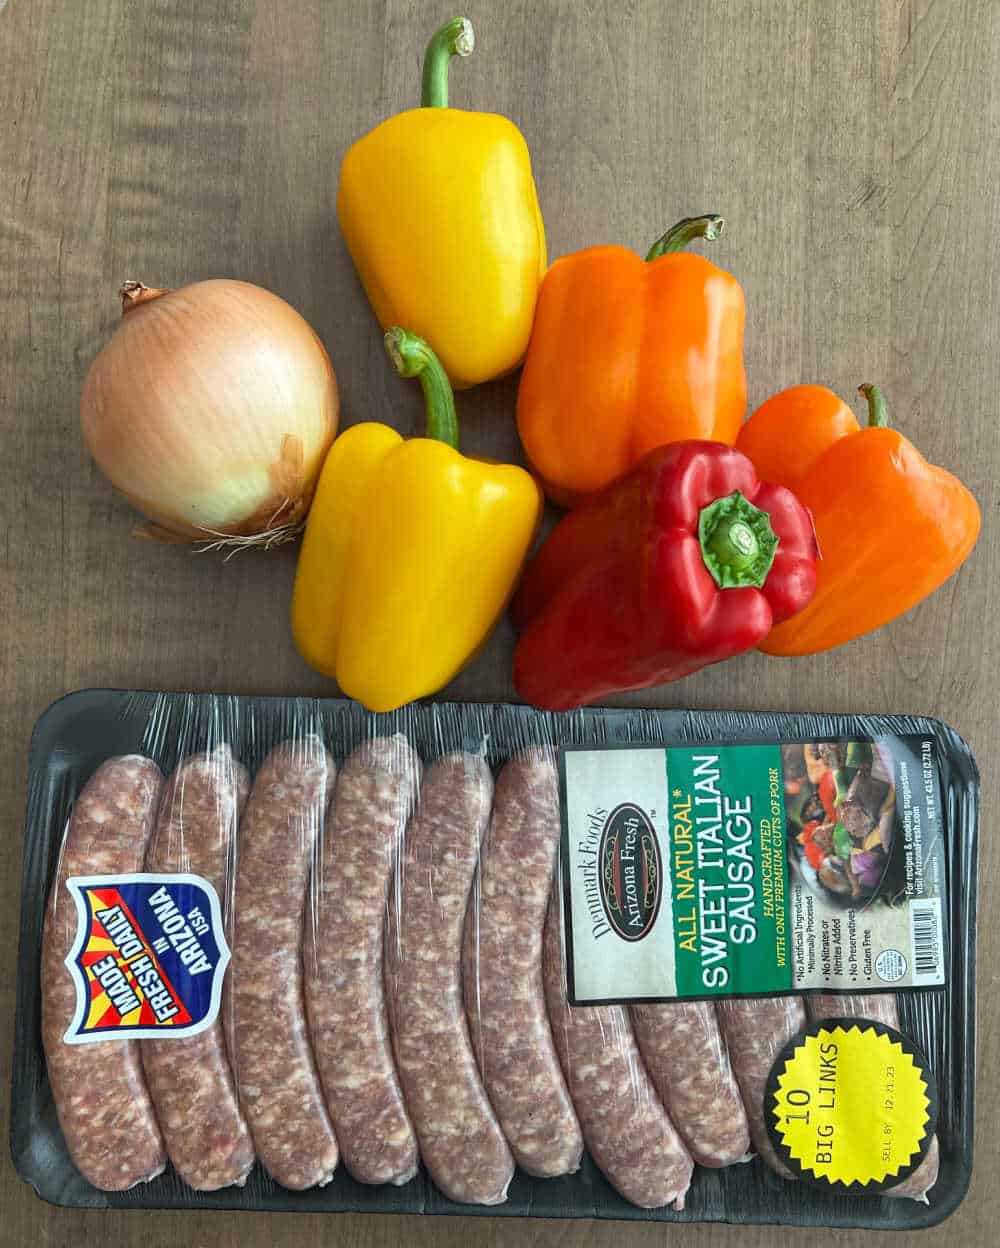 Italian sausage links, onion, bell peppers